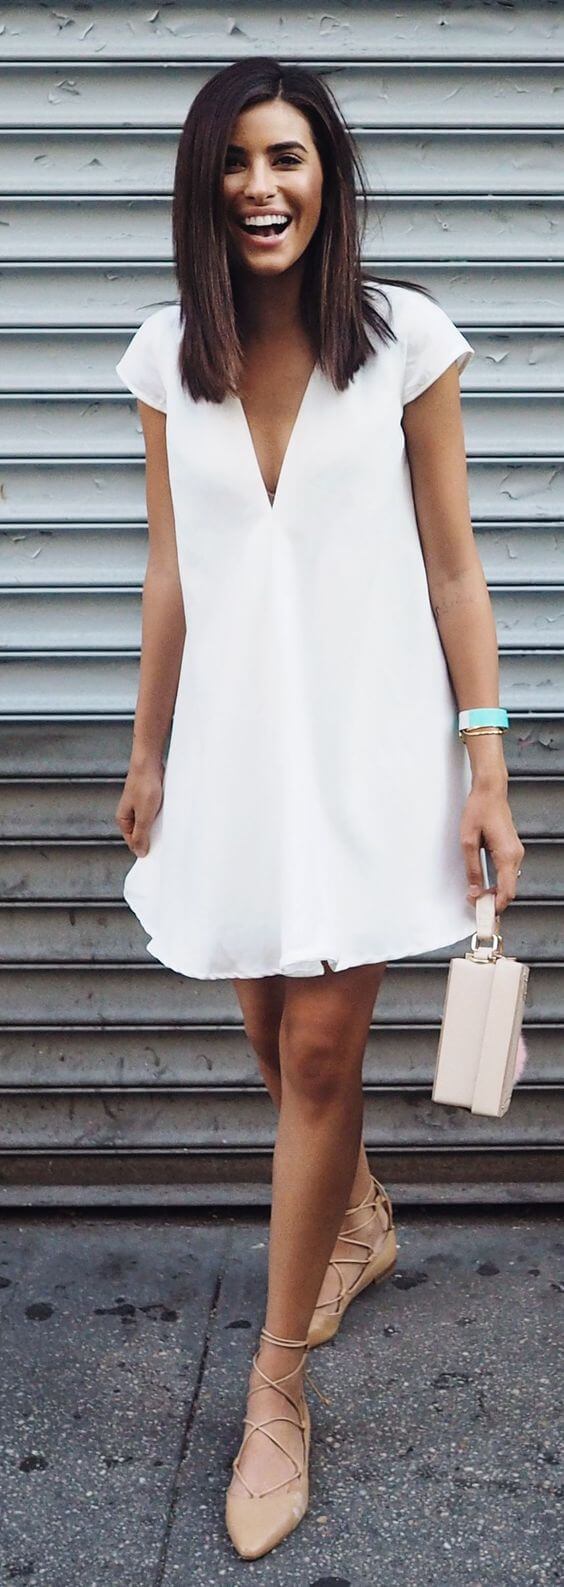 Simply beautiful: Strappy ballerina shoes are the perfect accompaniment to this effortless white tunic.